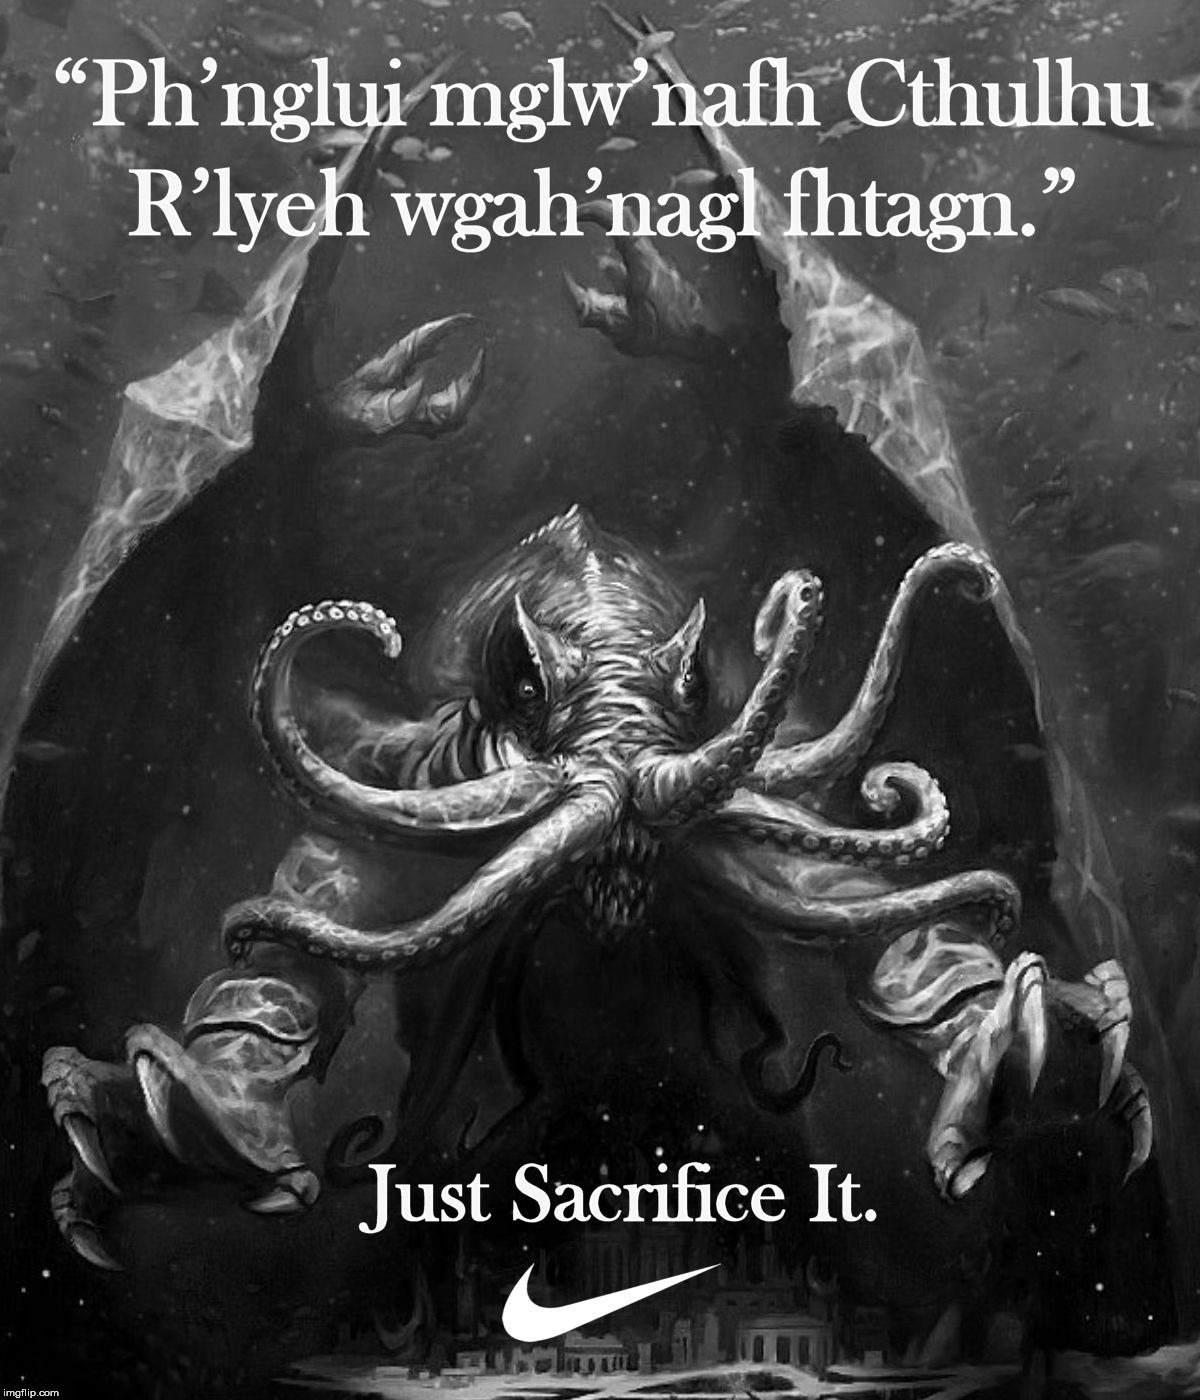 In his house at R'lyeh dead Cthulhu waits dreaming. | image tagged in cthulhu,lovecraft,nike,sacrifice,just | made w/ Imgflip meme maker